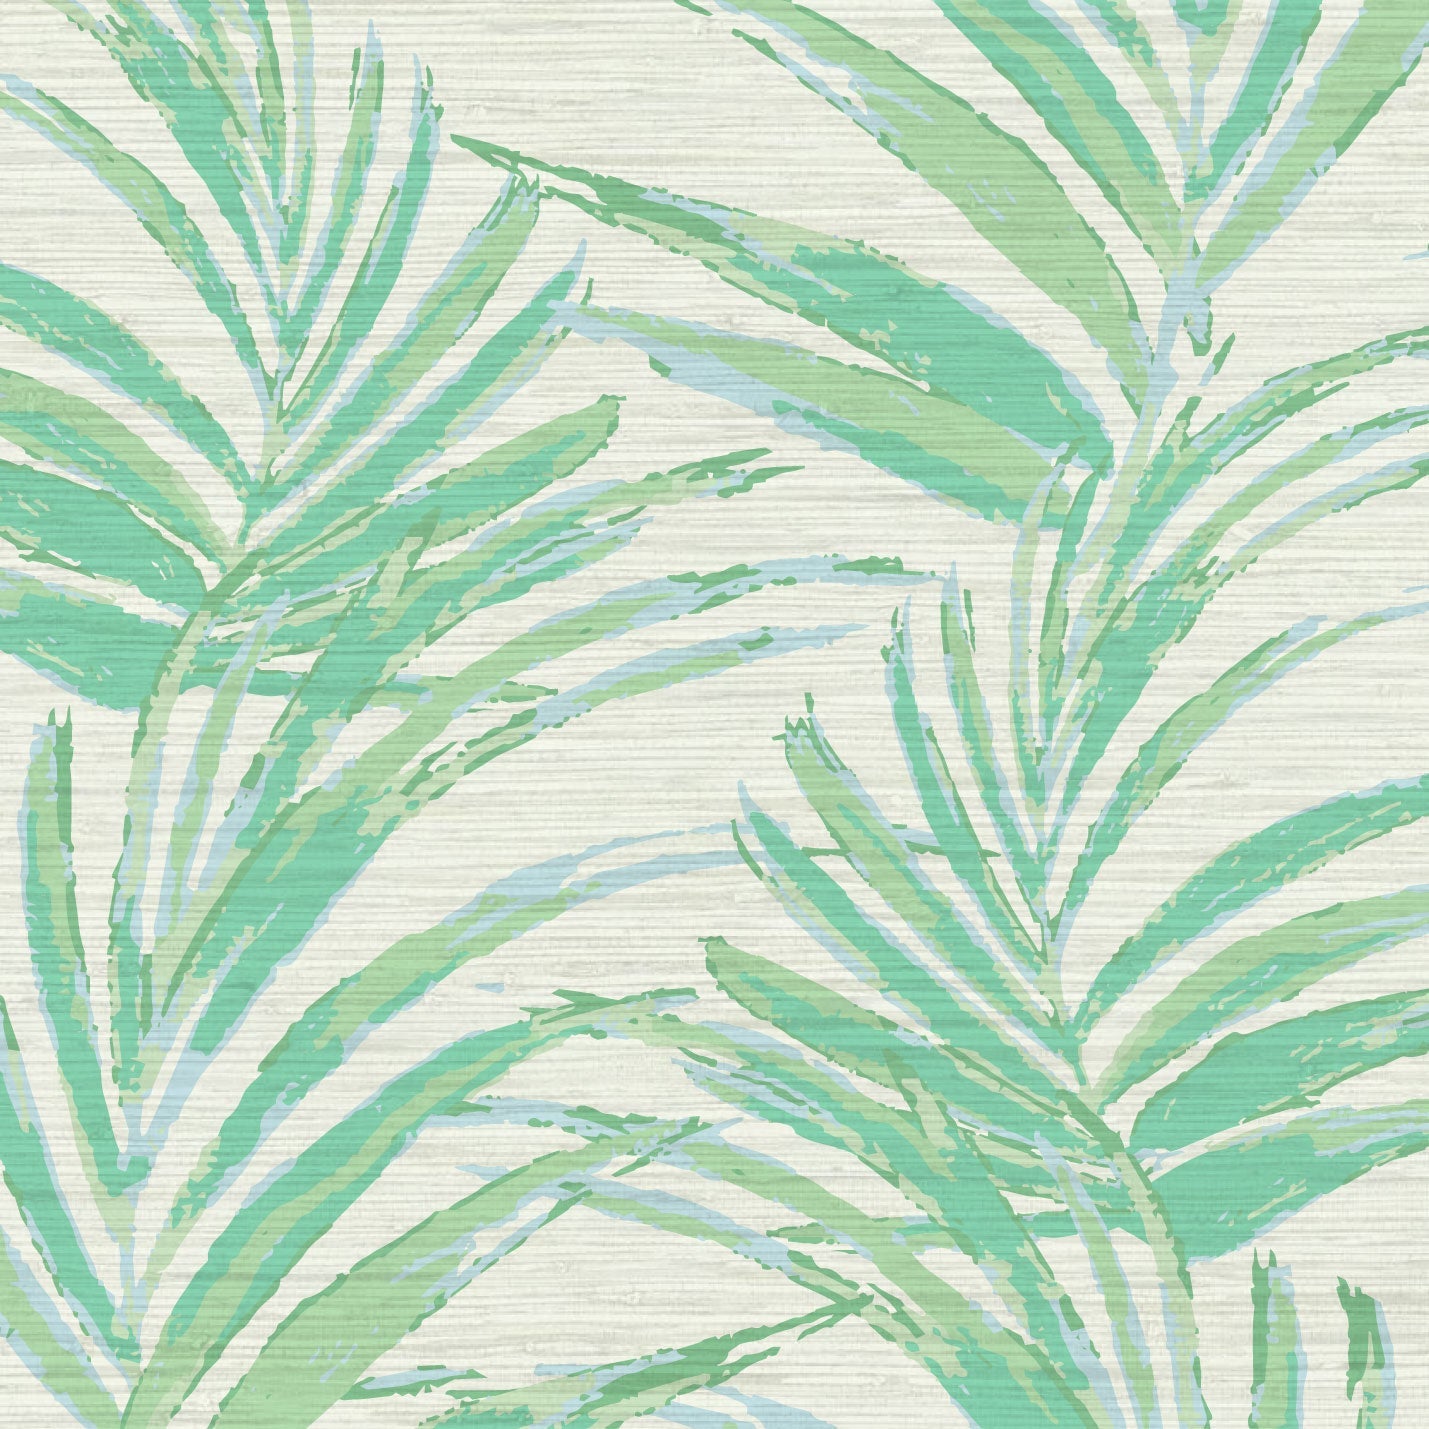 grasscloth printed wallpaper of linear twisted palm leaves vertical oversized stripes Grasscloth Natural Textured Eco-Friendly Non-toxic High-quality Sustainable practices Sustainability Interior Design Wall covering Bold Wallpaper Custom Tailor-made Retro chic Tropical jungle beverly hills hilton hotel palm print garden botanical Coastal Seashore Waterfront Vacation home styling Retreat Relaxed beach vibes Beach cottage Shoreline beverly hills hotel ocean blue sky light baby pastel green mint sage